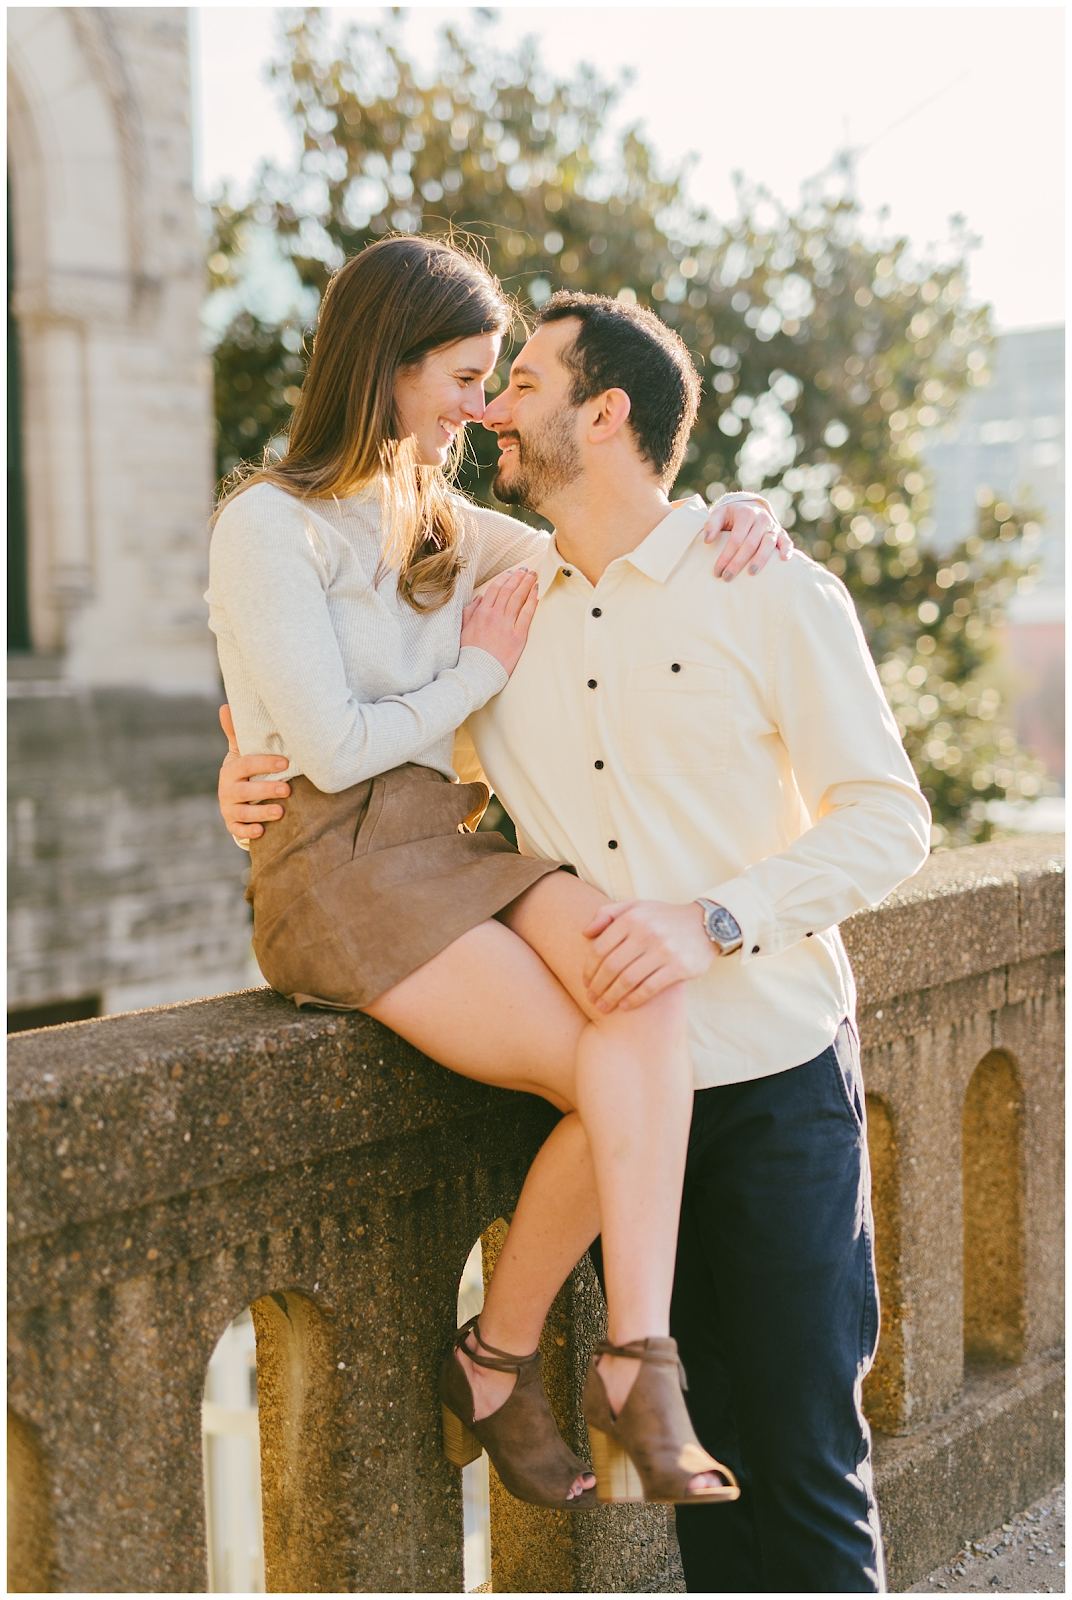 The Best Nashville Engagement Session Locations from Kéra Photography featured on Nashville Bride Guide